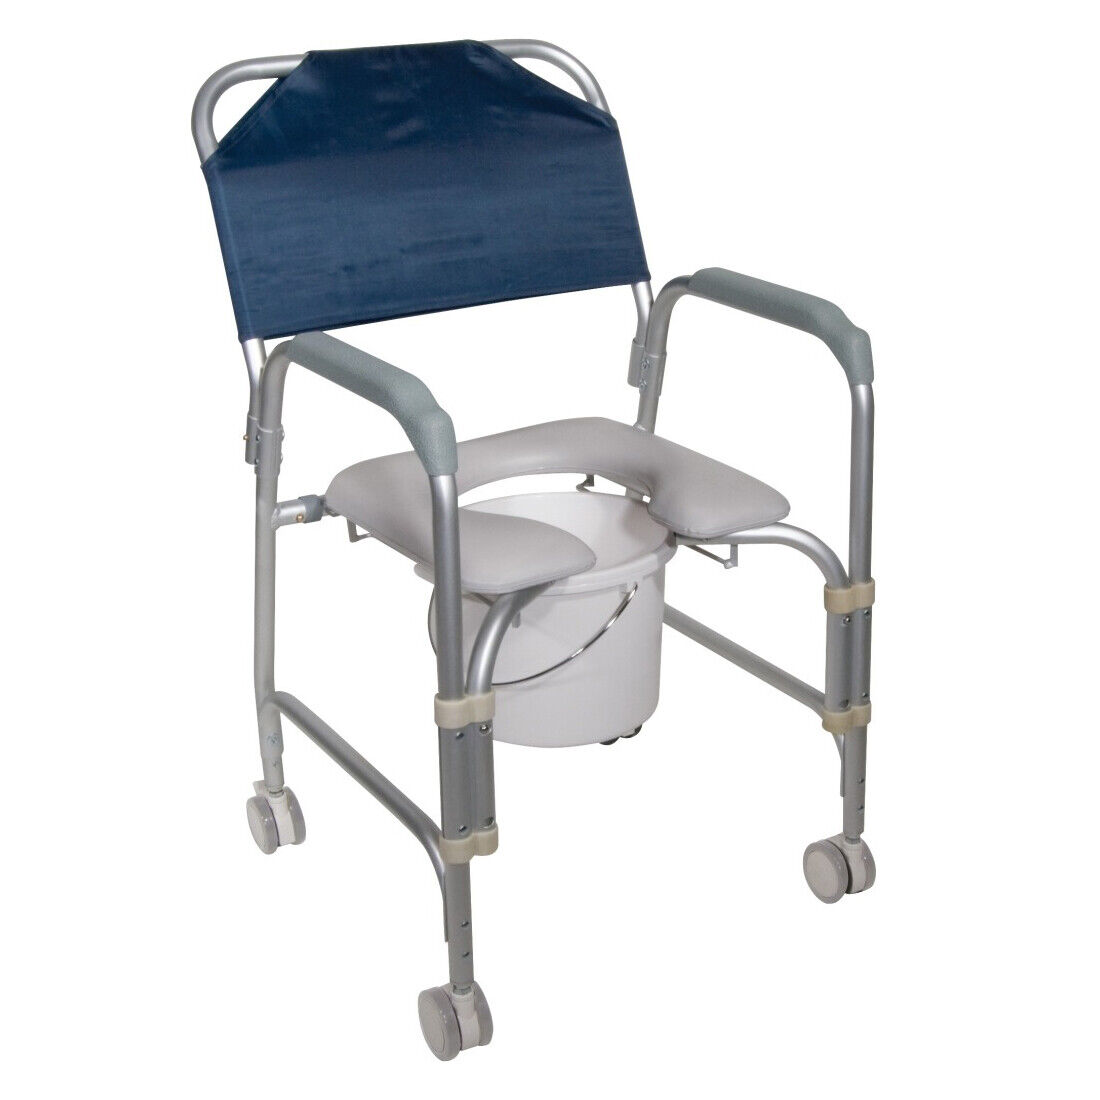 Drive 11114KD-1 Lightweight Portable Shower with Chair 100% quality warranty Commode C Nashville-Davidson Mall